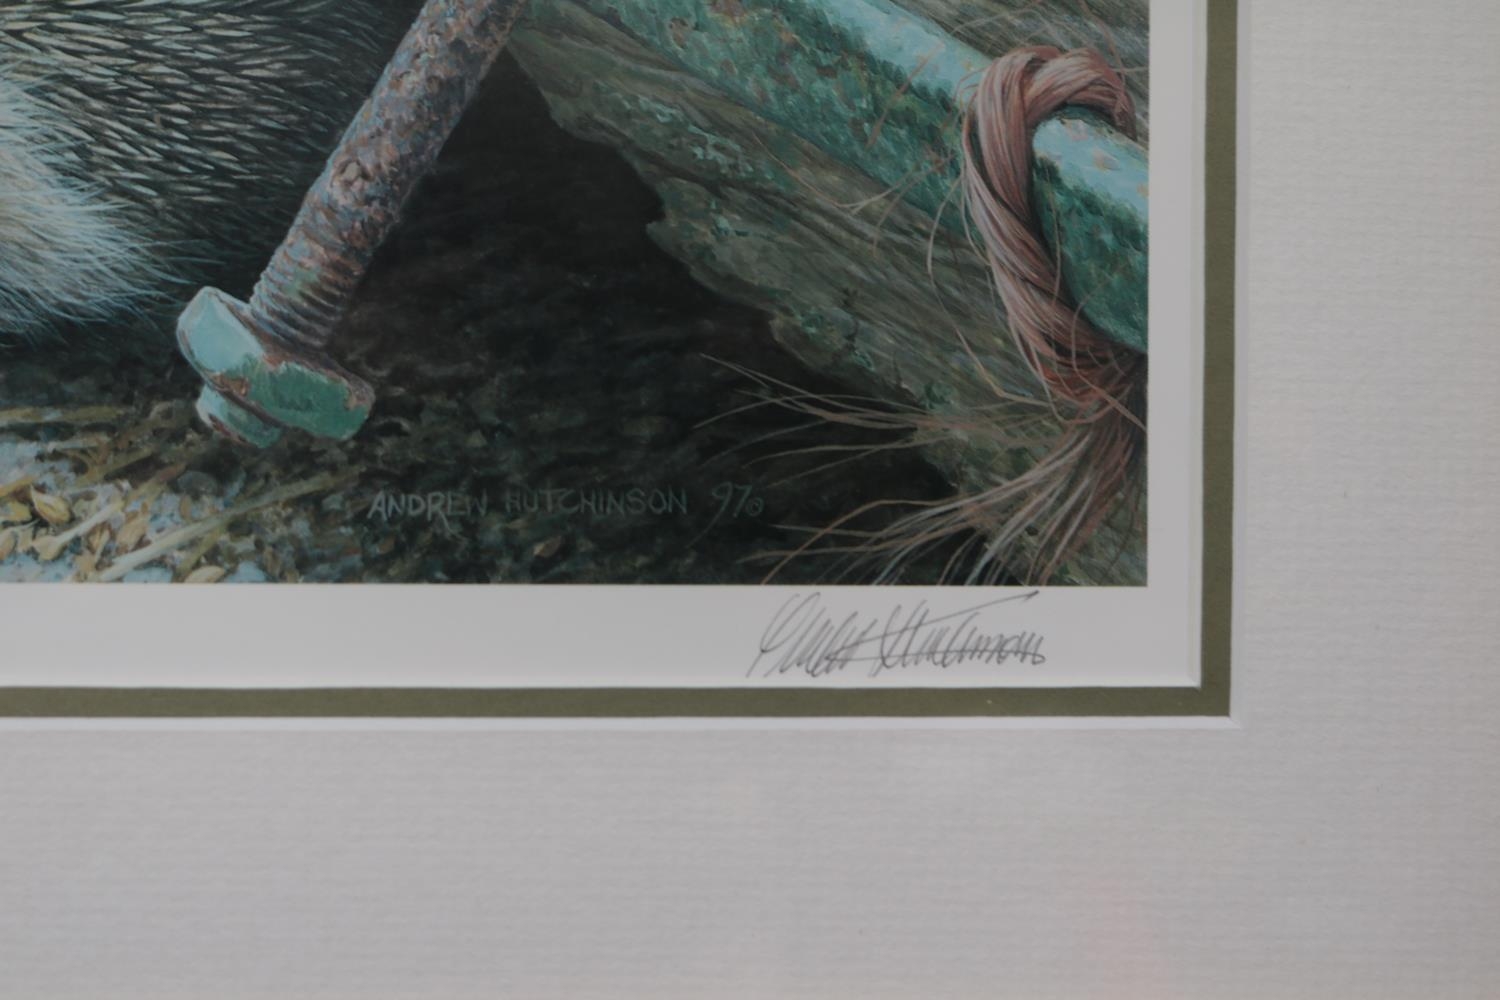 2 Framed Limited edition signed prints by Andrew Hutchinson depicting Hedgehog and Wren - Image 2 of 3